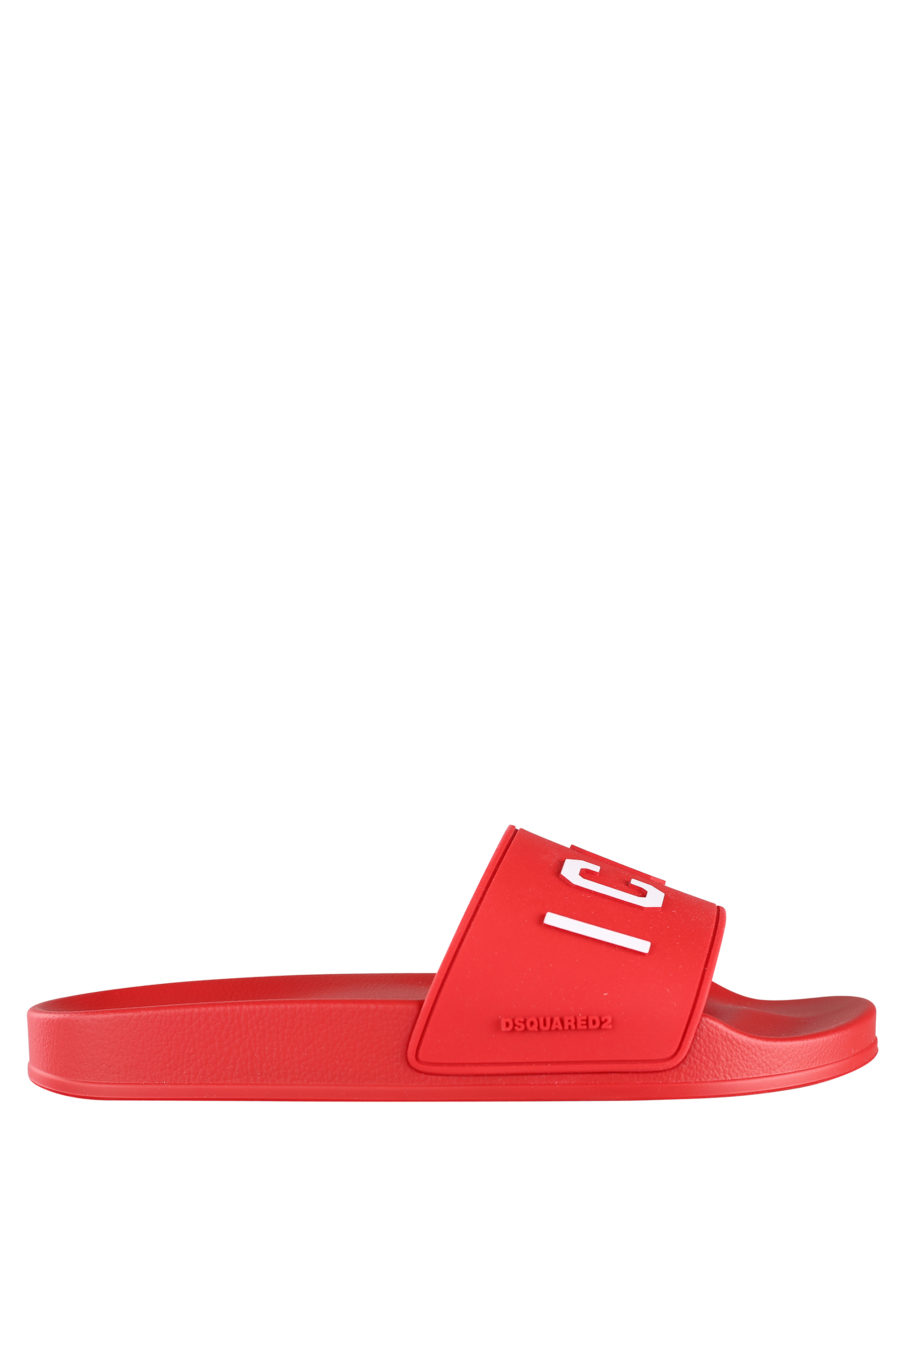 Red flip flops with white "icon" logo - IMG 9941